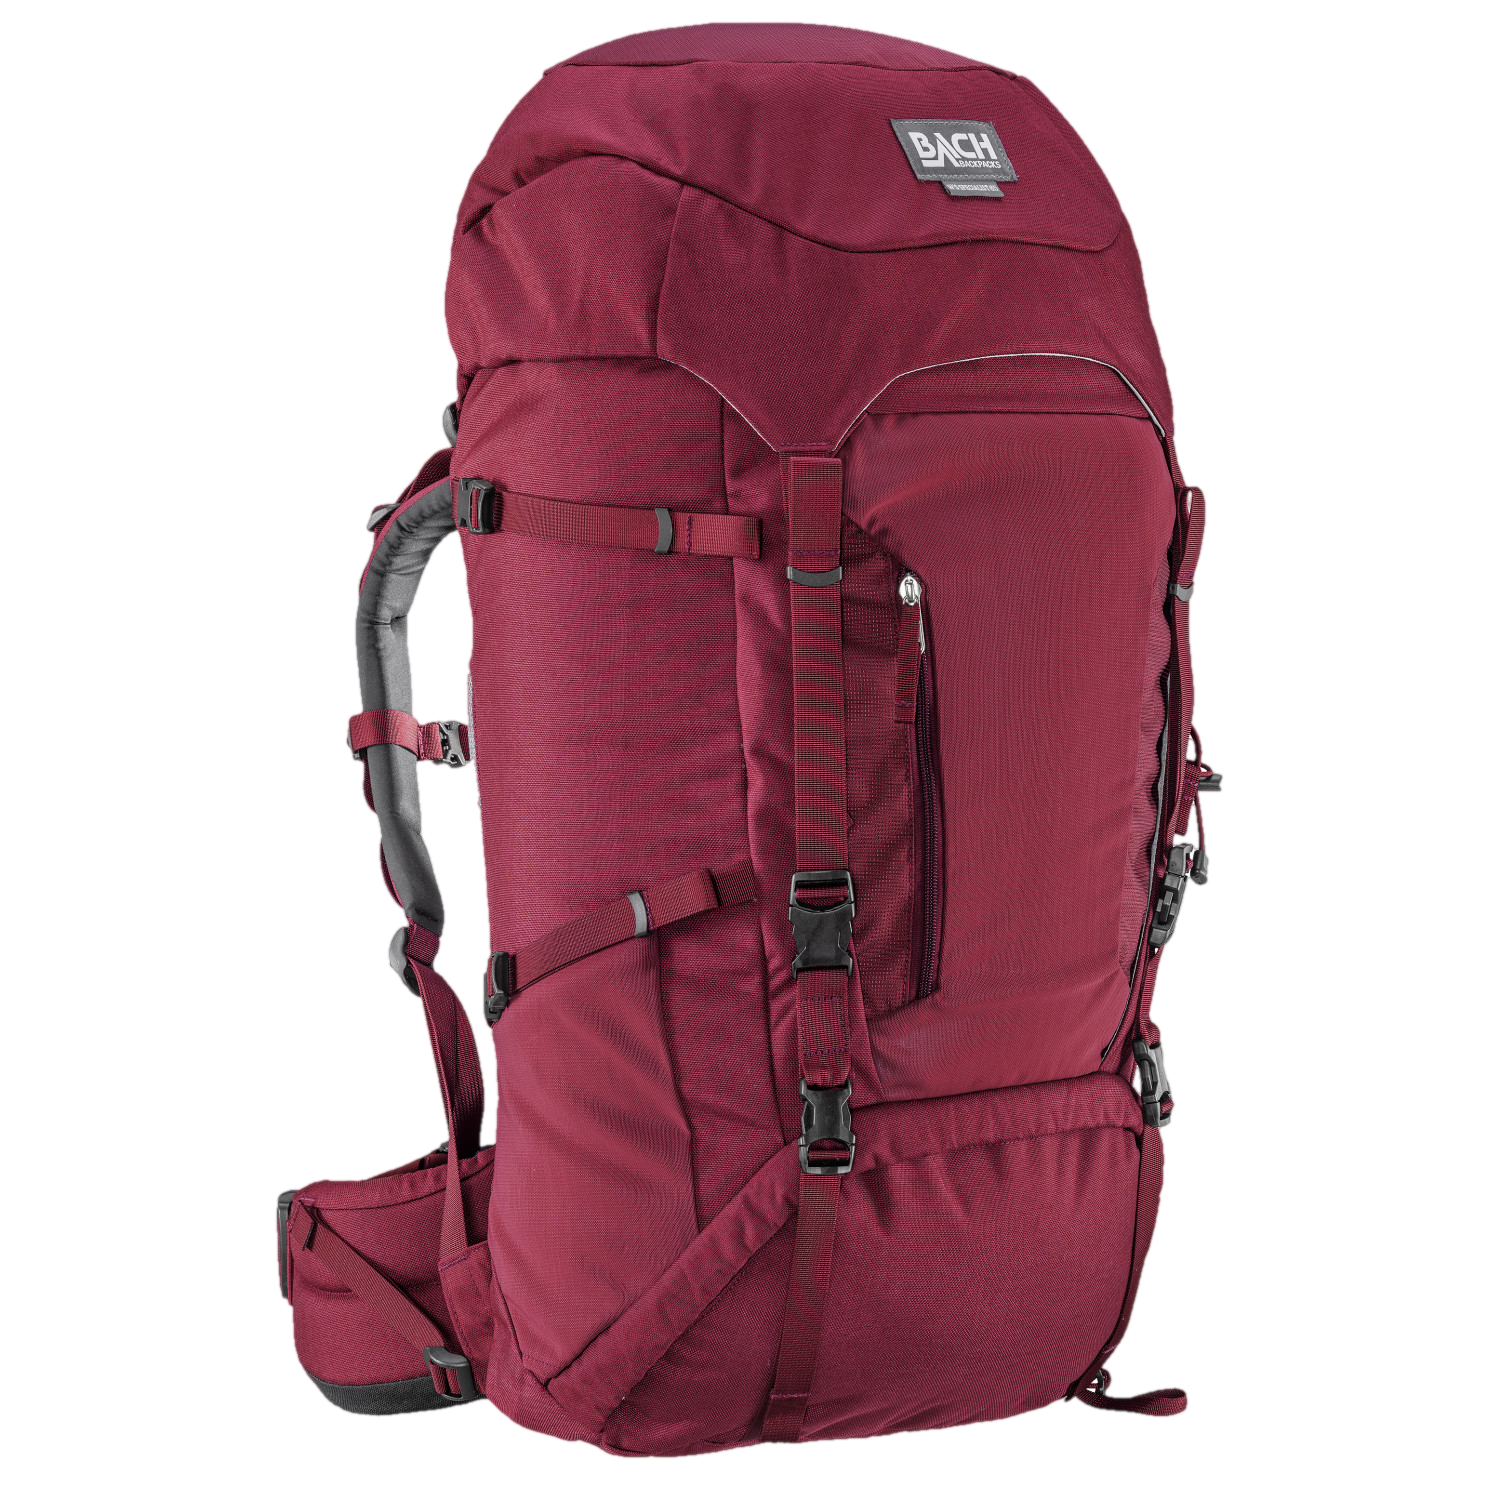 Bach W'S Specialist 65 Backpack Regular